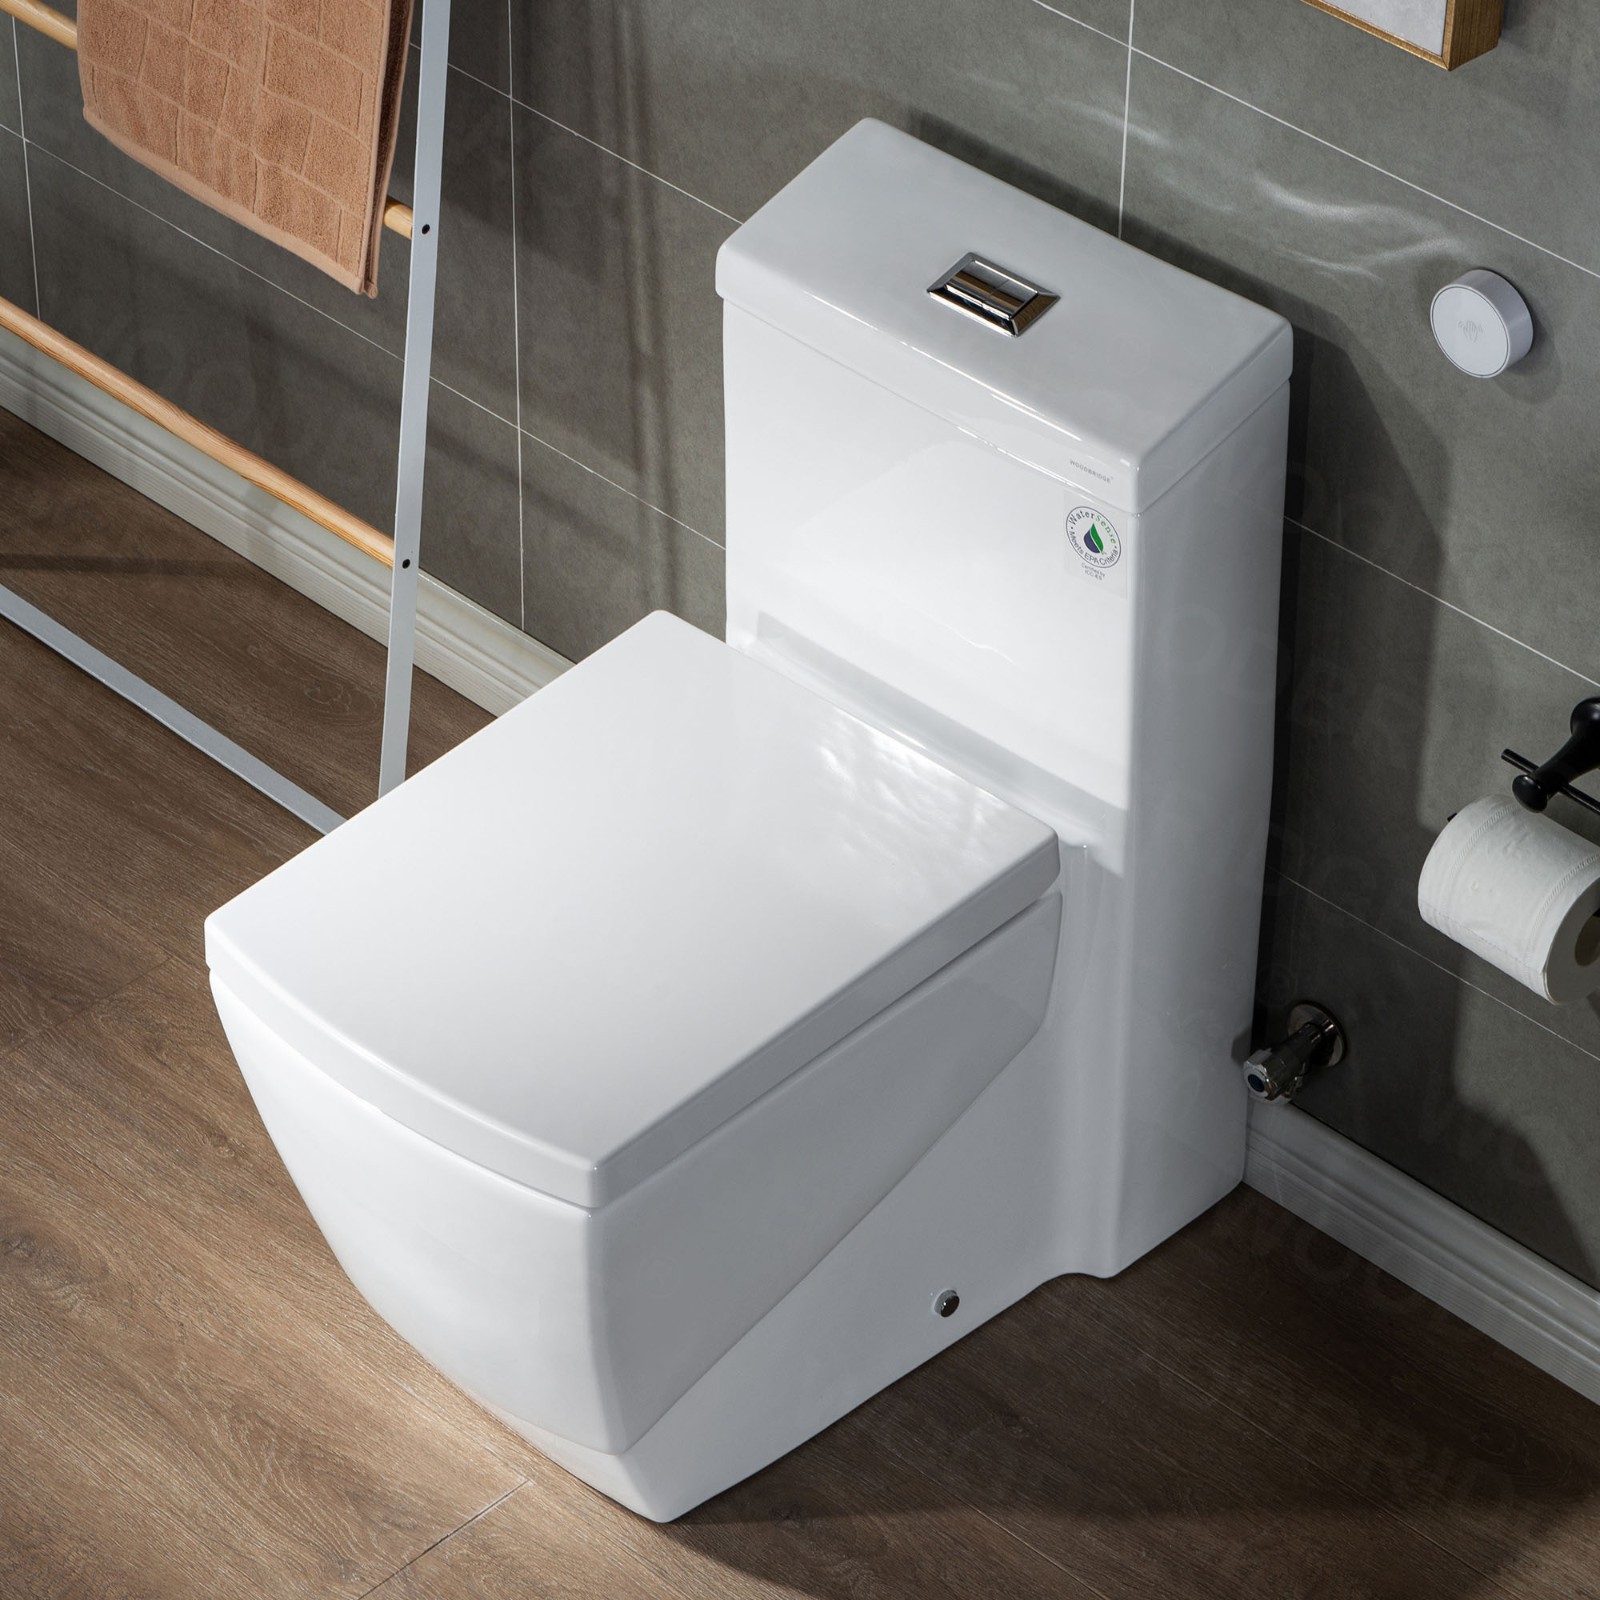  WOODBRIDGE B-0920-A Modern One-Piece Elongated Square toilet with Solf Closed Seat and Hand Free Touchless Sensor Flush Kit, White_5461